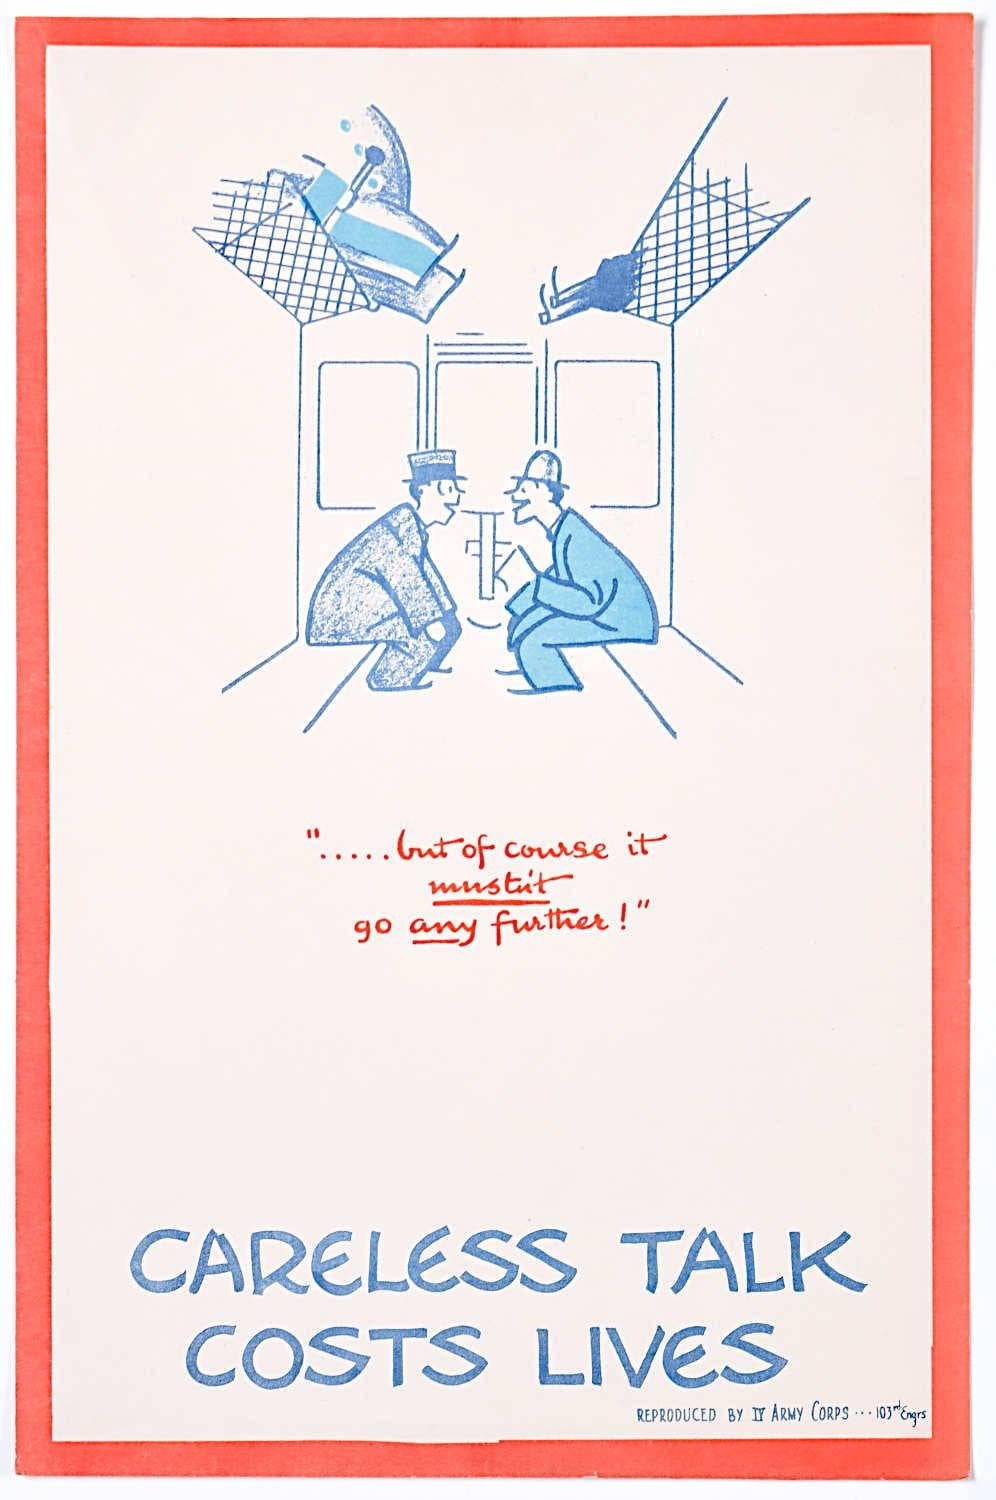 Fougasse (Cyril Kenneth Bird) Print – Careless Talk Costs Lives 'Fougasse' IV Army Corps Edition, Zweiter Weltkrieg, Poster